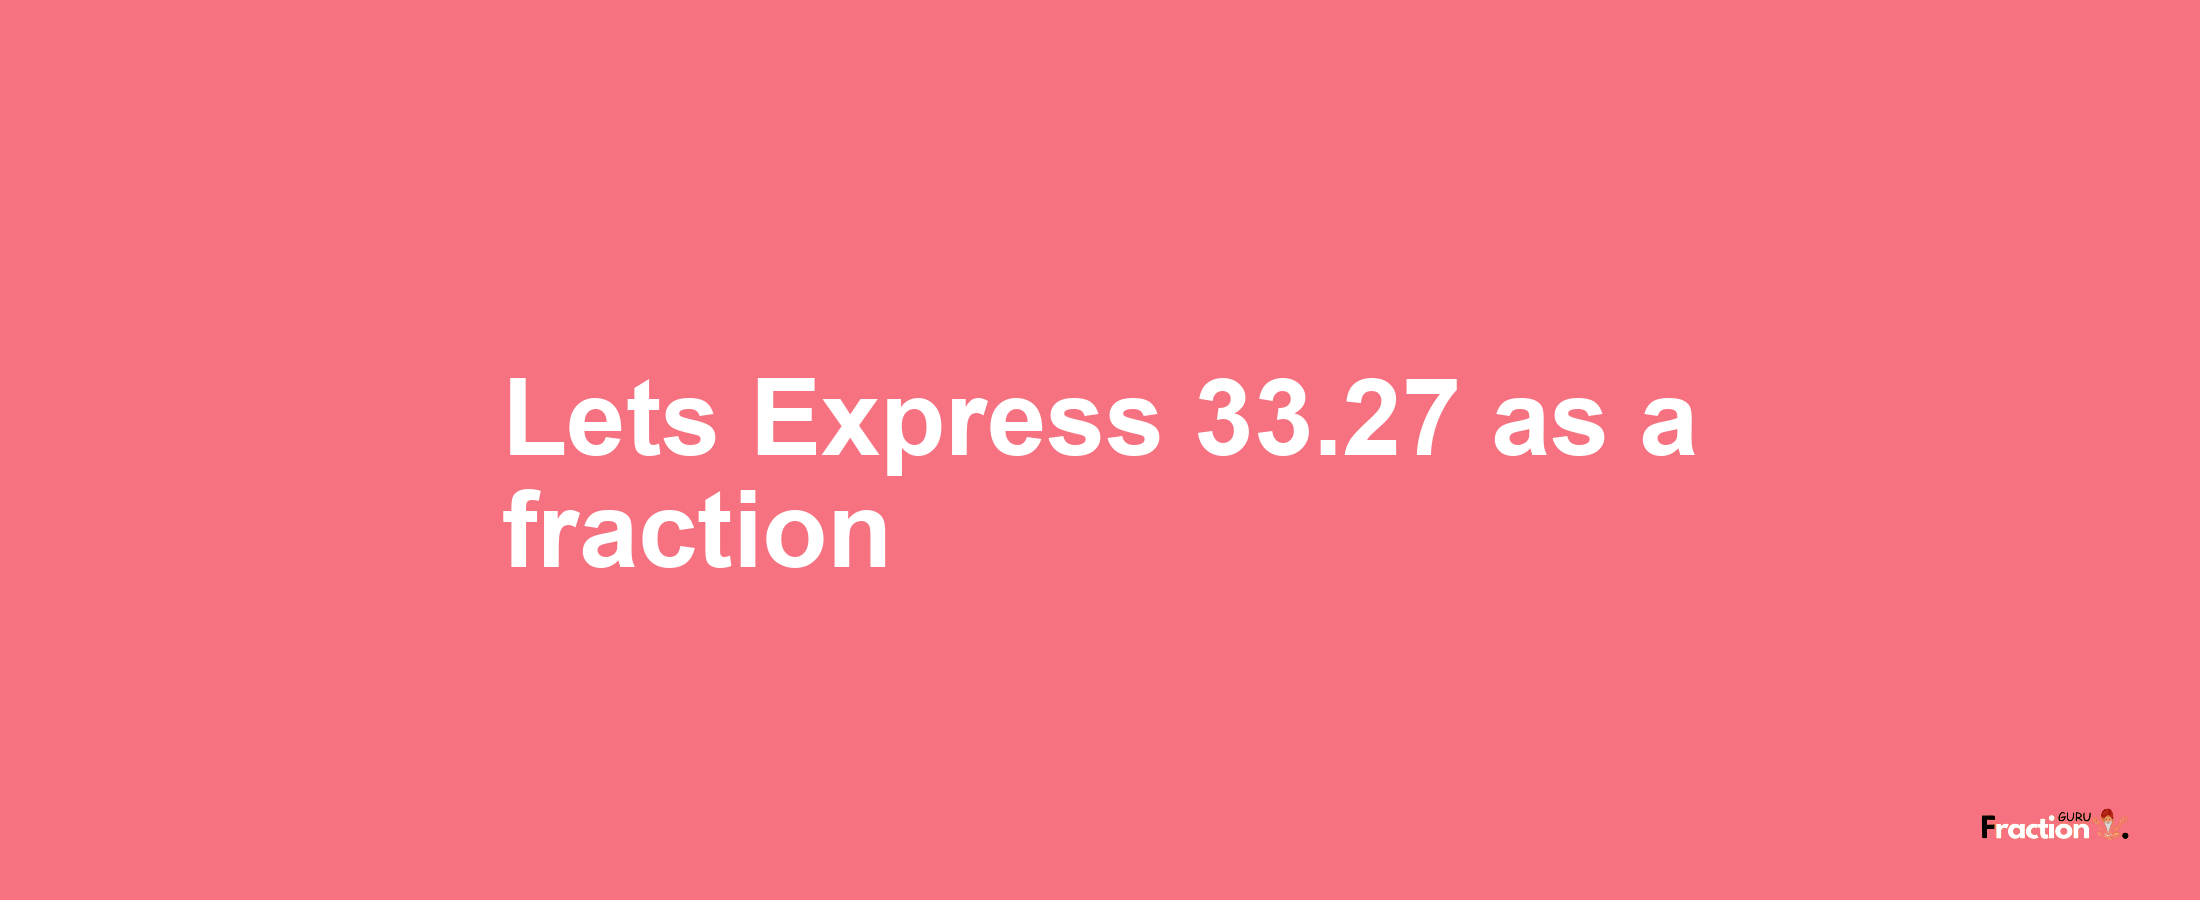 Lets Express 33.27 as afraction